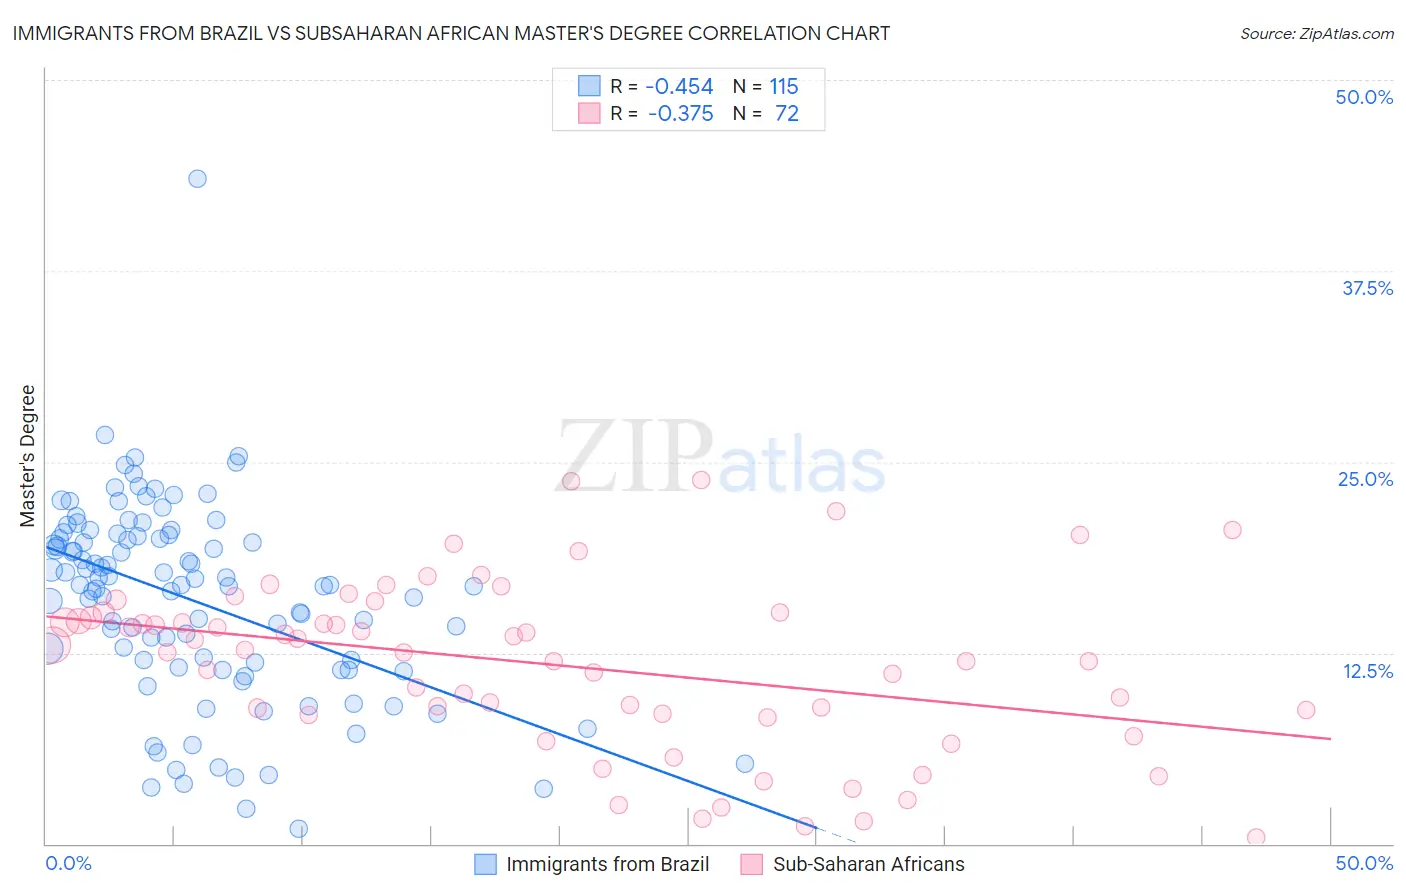 Immigrants from Brazil vs Subsaharan African Master's Degree